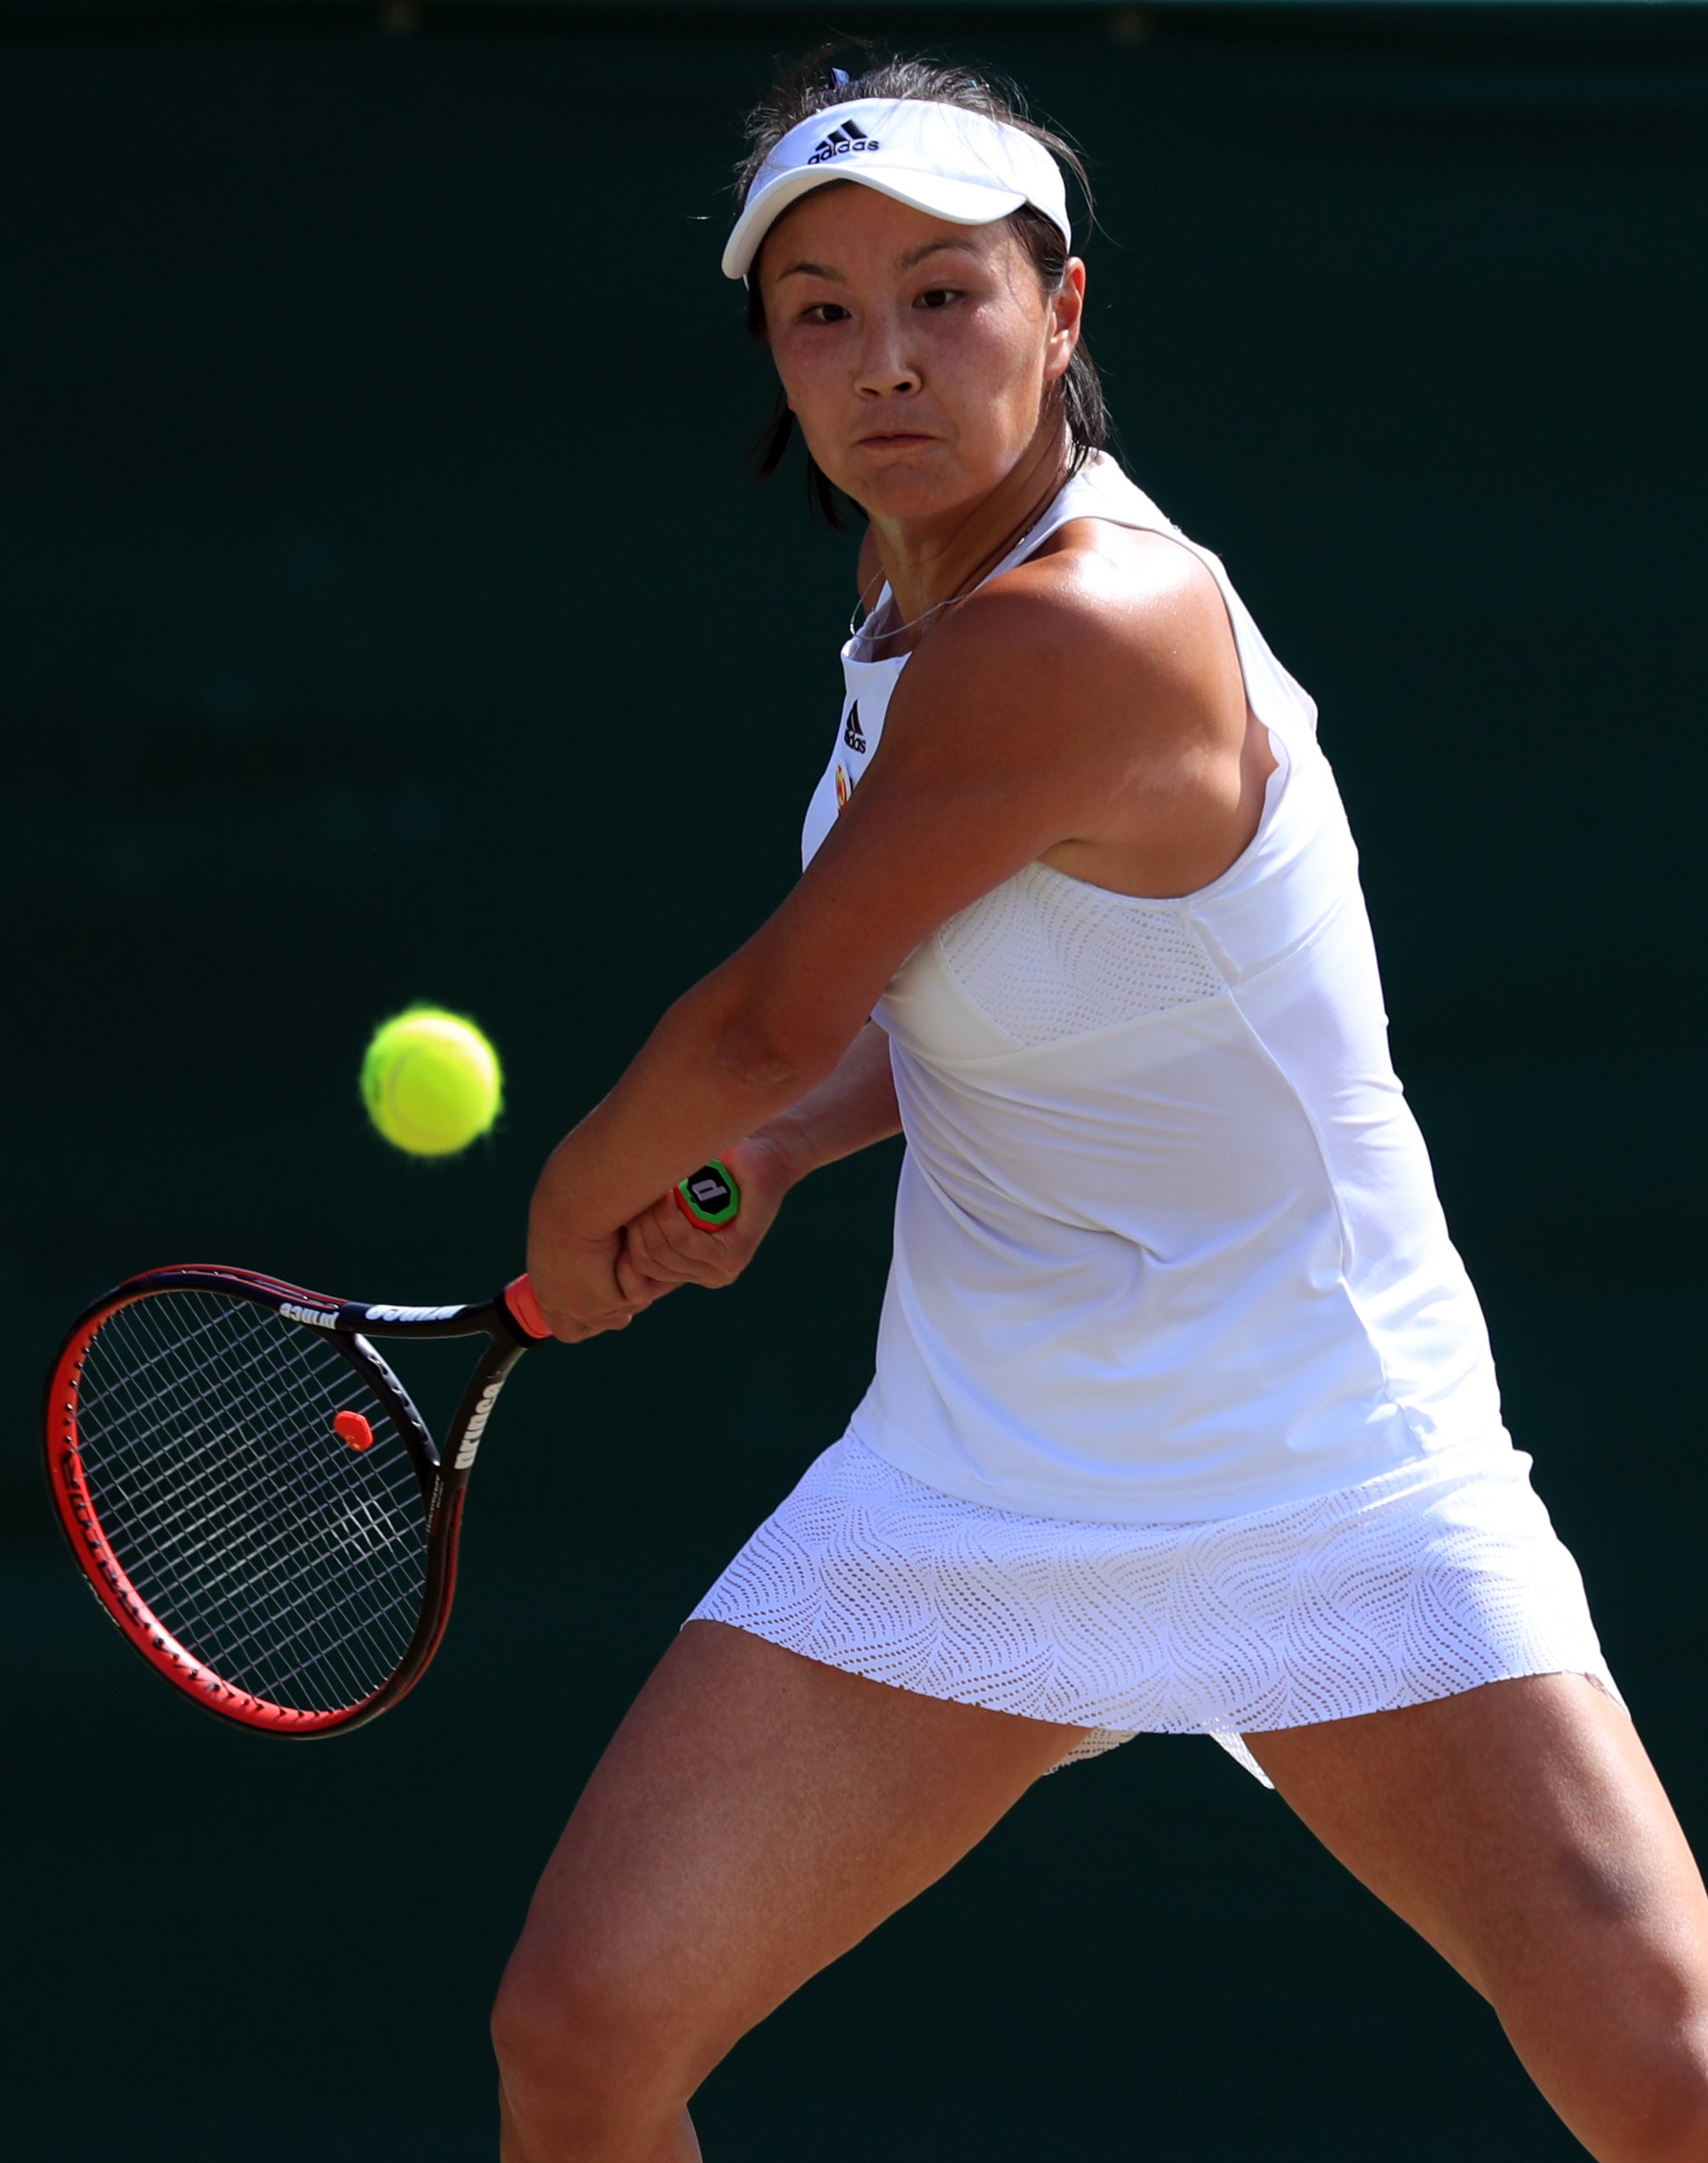 Peng Shuai has not been seen in public since making allegations of sexual assault at the start of the month (PA)